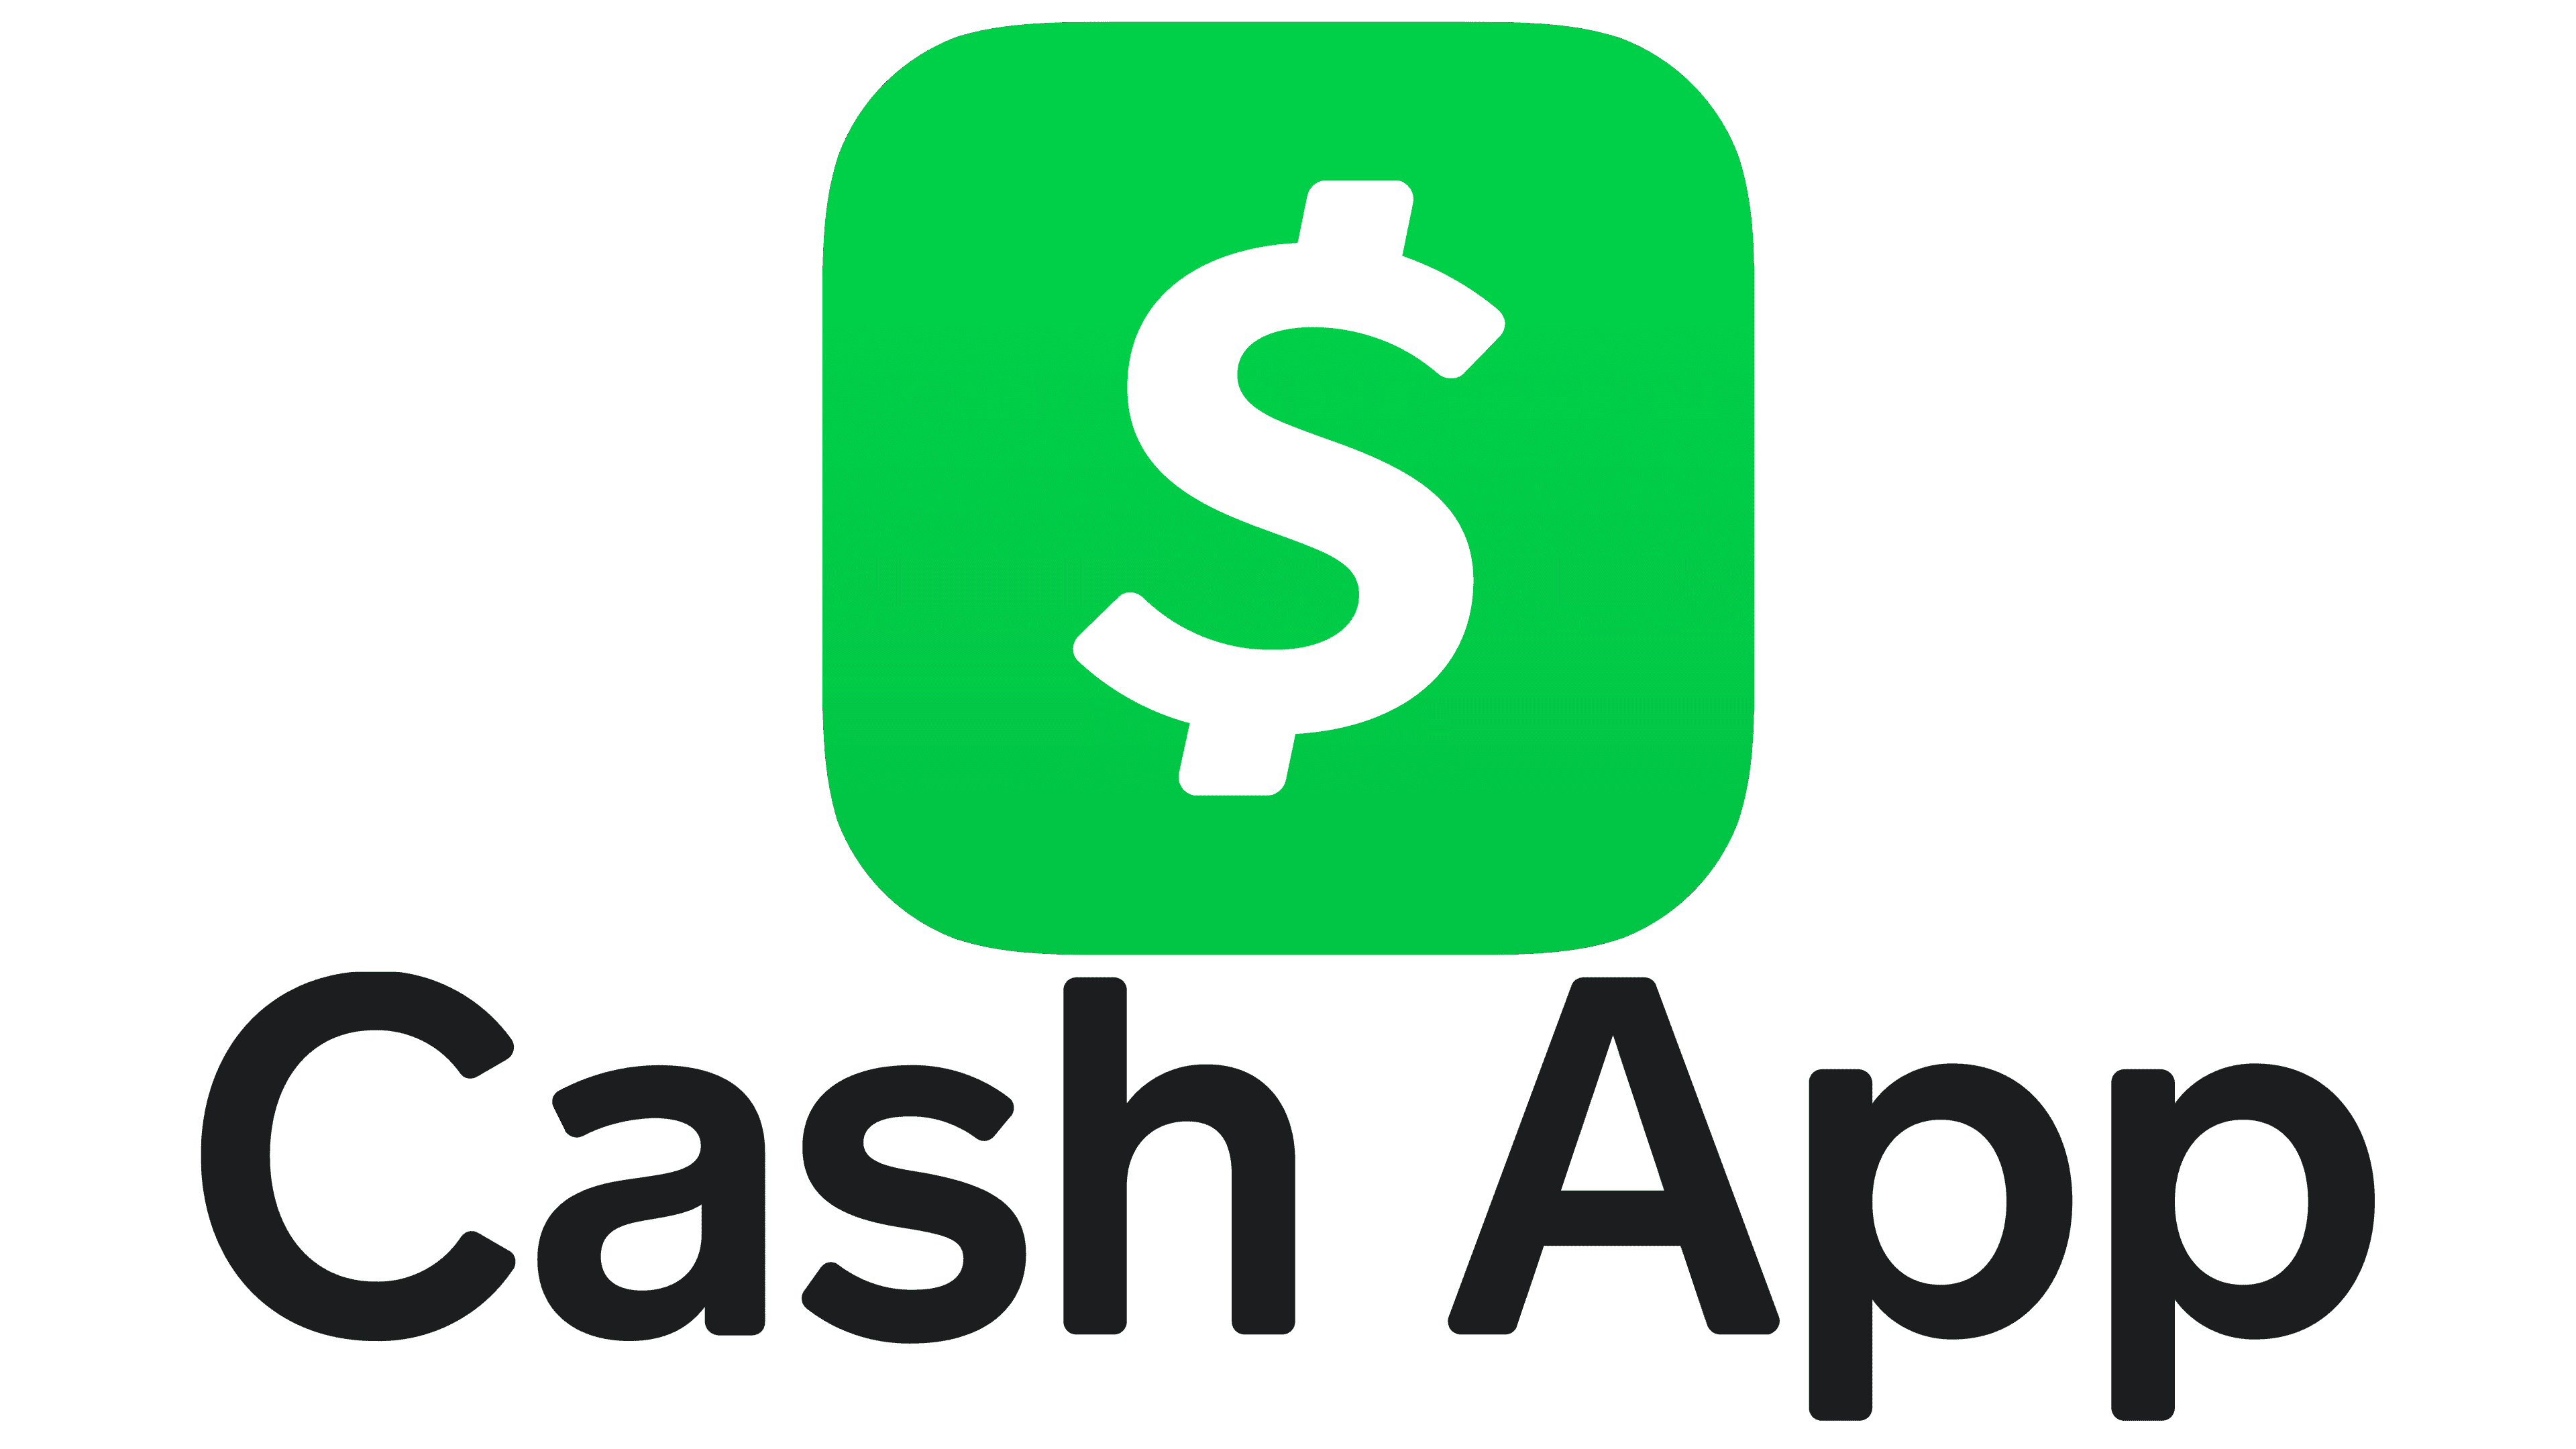 Cash App logo jNBfI75 - Scholarships For Moms - Getting $10,000 Or More To Make Going To University Free!